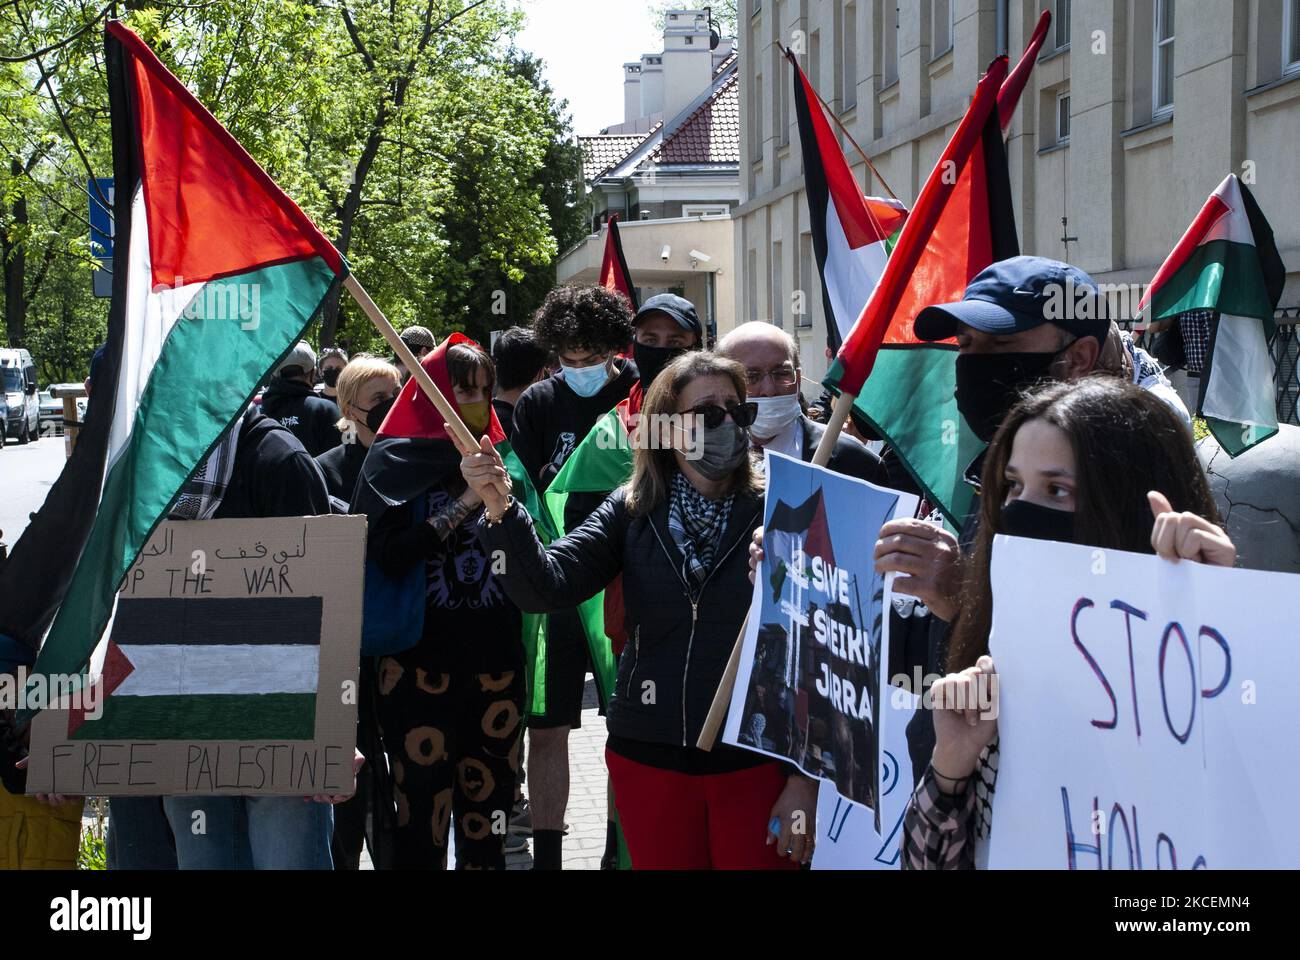 Palestinians and Poles (mostly from unions, left-wing organizations or anarchists) gathered in Warsaw, Poland, on May 15, 2021 in a protest against Israel aggression in Gaza and West Bank. The protest took place opposite to the Embassy of Israel in Poland and gathered around 200 participants. Protesters named Israel activities as a 'modern apartheid' and 'genocide, not a conflict', as well raised slogans of free Palestine. (Photo by Piotr Lapinski/NurPhoto) Stock Photo